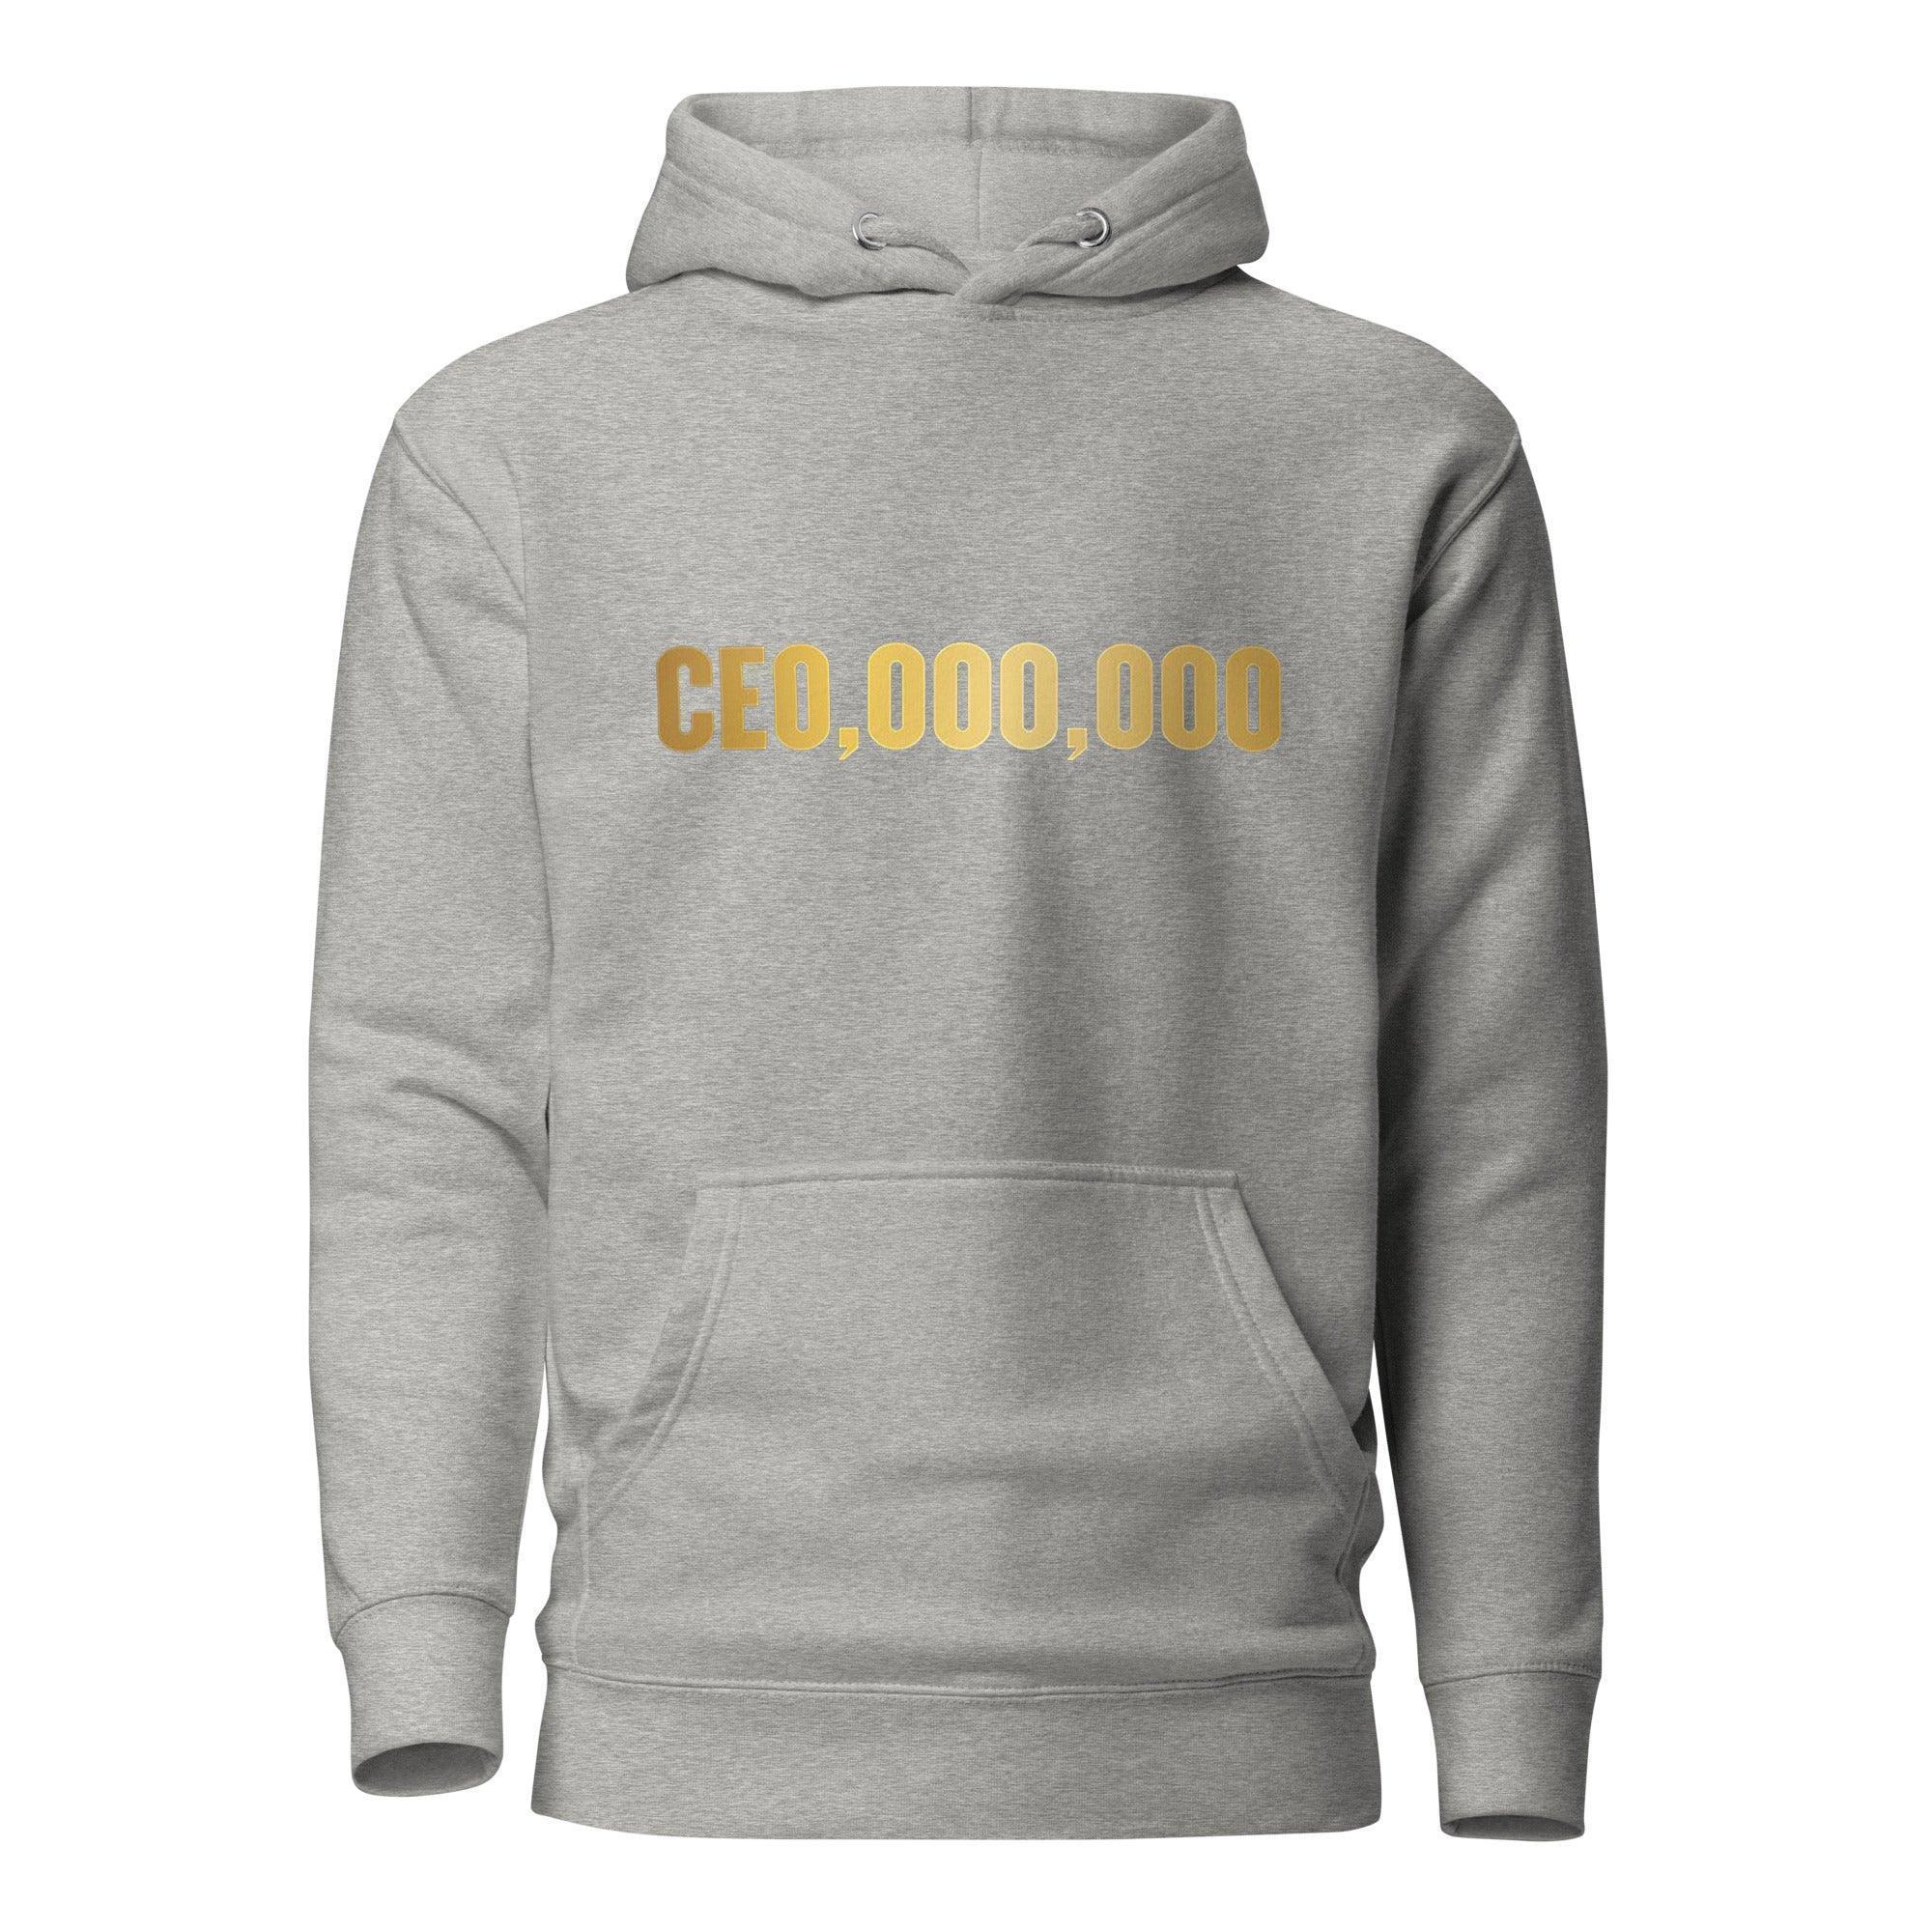 CEO,000,000 Gold Pullover Hoodie - InvestmenTees